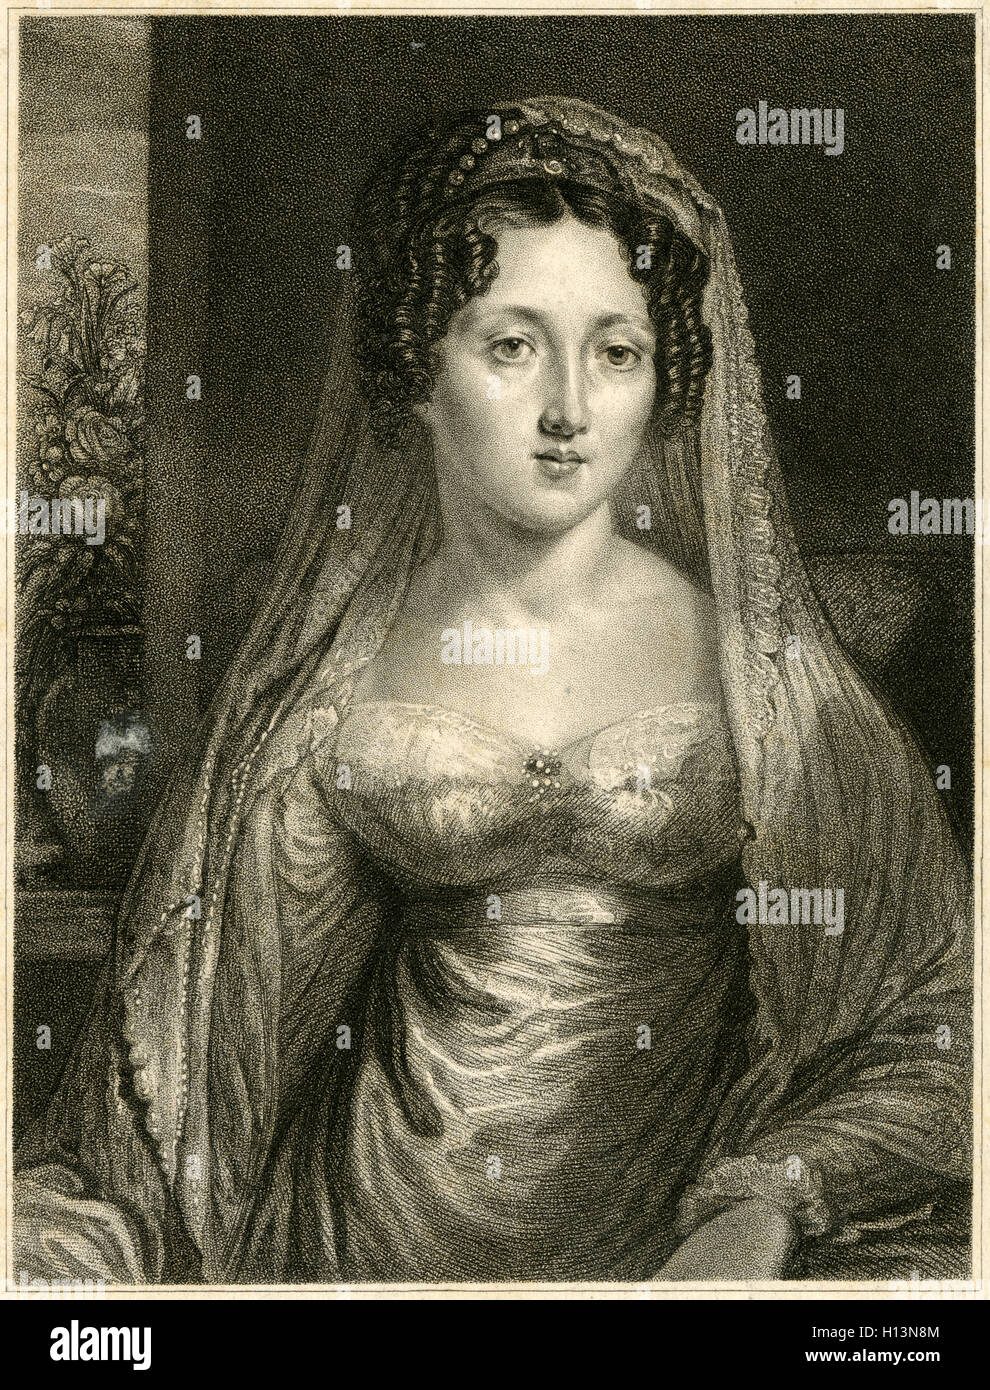 Antique c1800 engraving, Susan Viscountess Ebrington. Susan, Viscountess Ebrington (1796-1827), Wife of 2nd Earl Fortescue and daughter of Dudley Ryder, 1st Earl of Harrowby. SOURCE: ORIGINAL ENGRAVING. Stock Photo